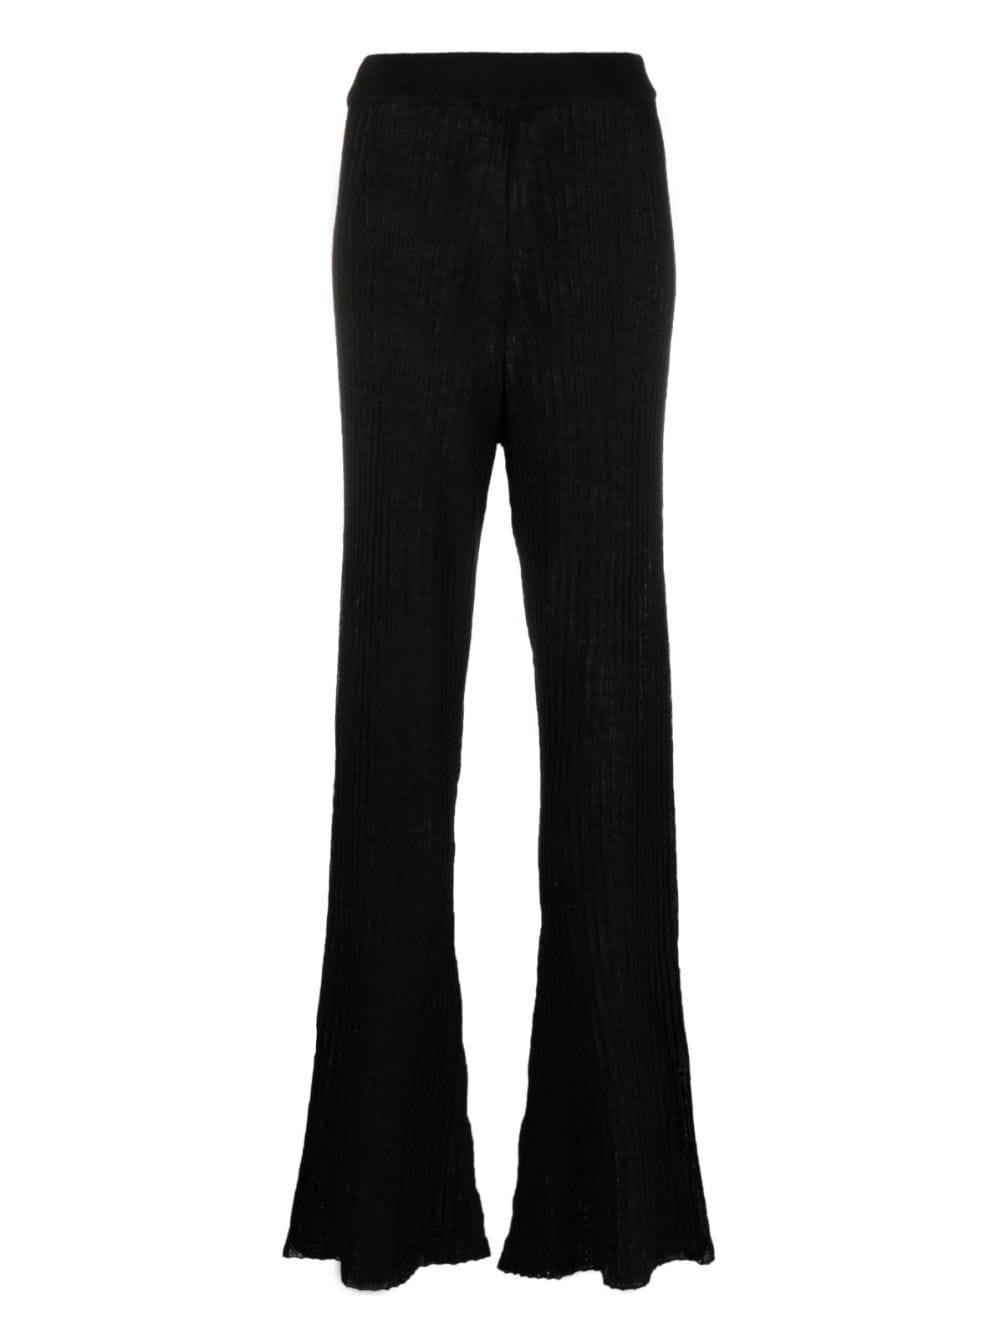 Rodebjer high-waist flared trousers - 9999 BLACK